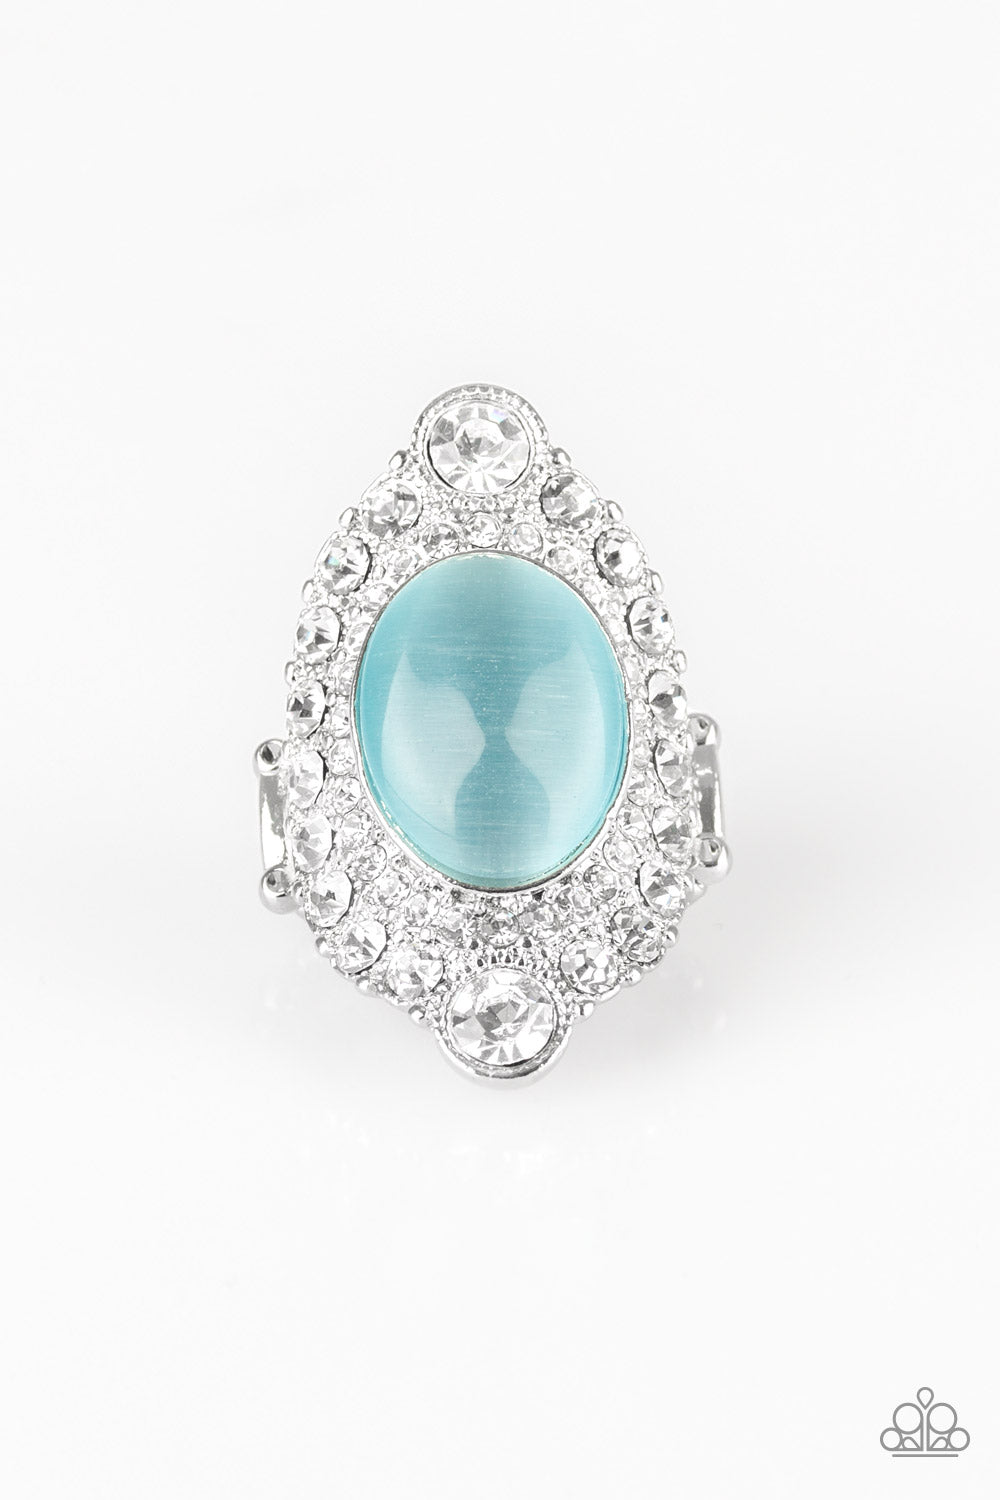 Riviera Royalty - Blue A glowing blue moonstone is pressed into a dramatic silver band radiating with glassy white rhinestones for a glamorous flair. Features a stretchy band for a flexible fit.  Sold as one individual ring.